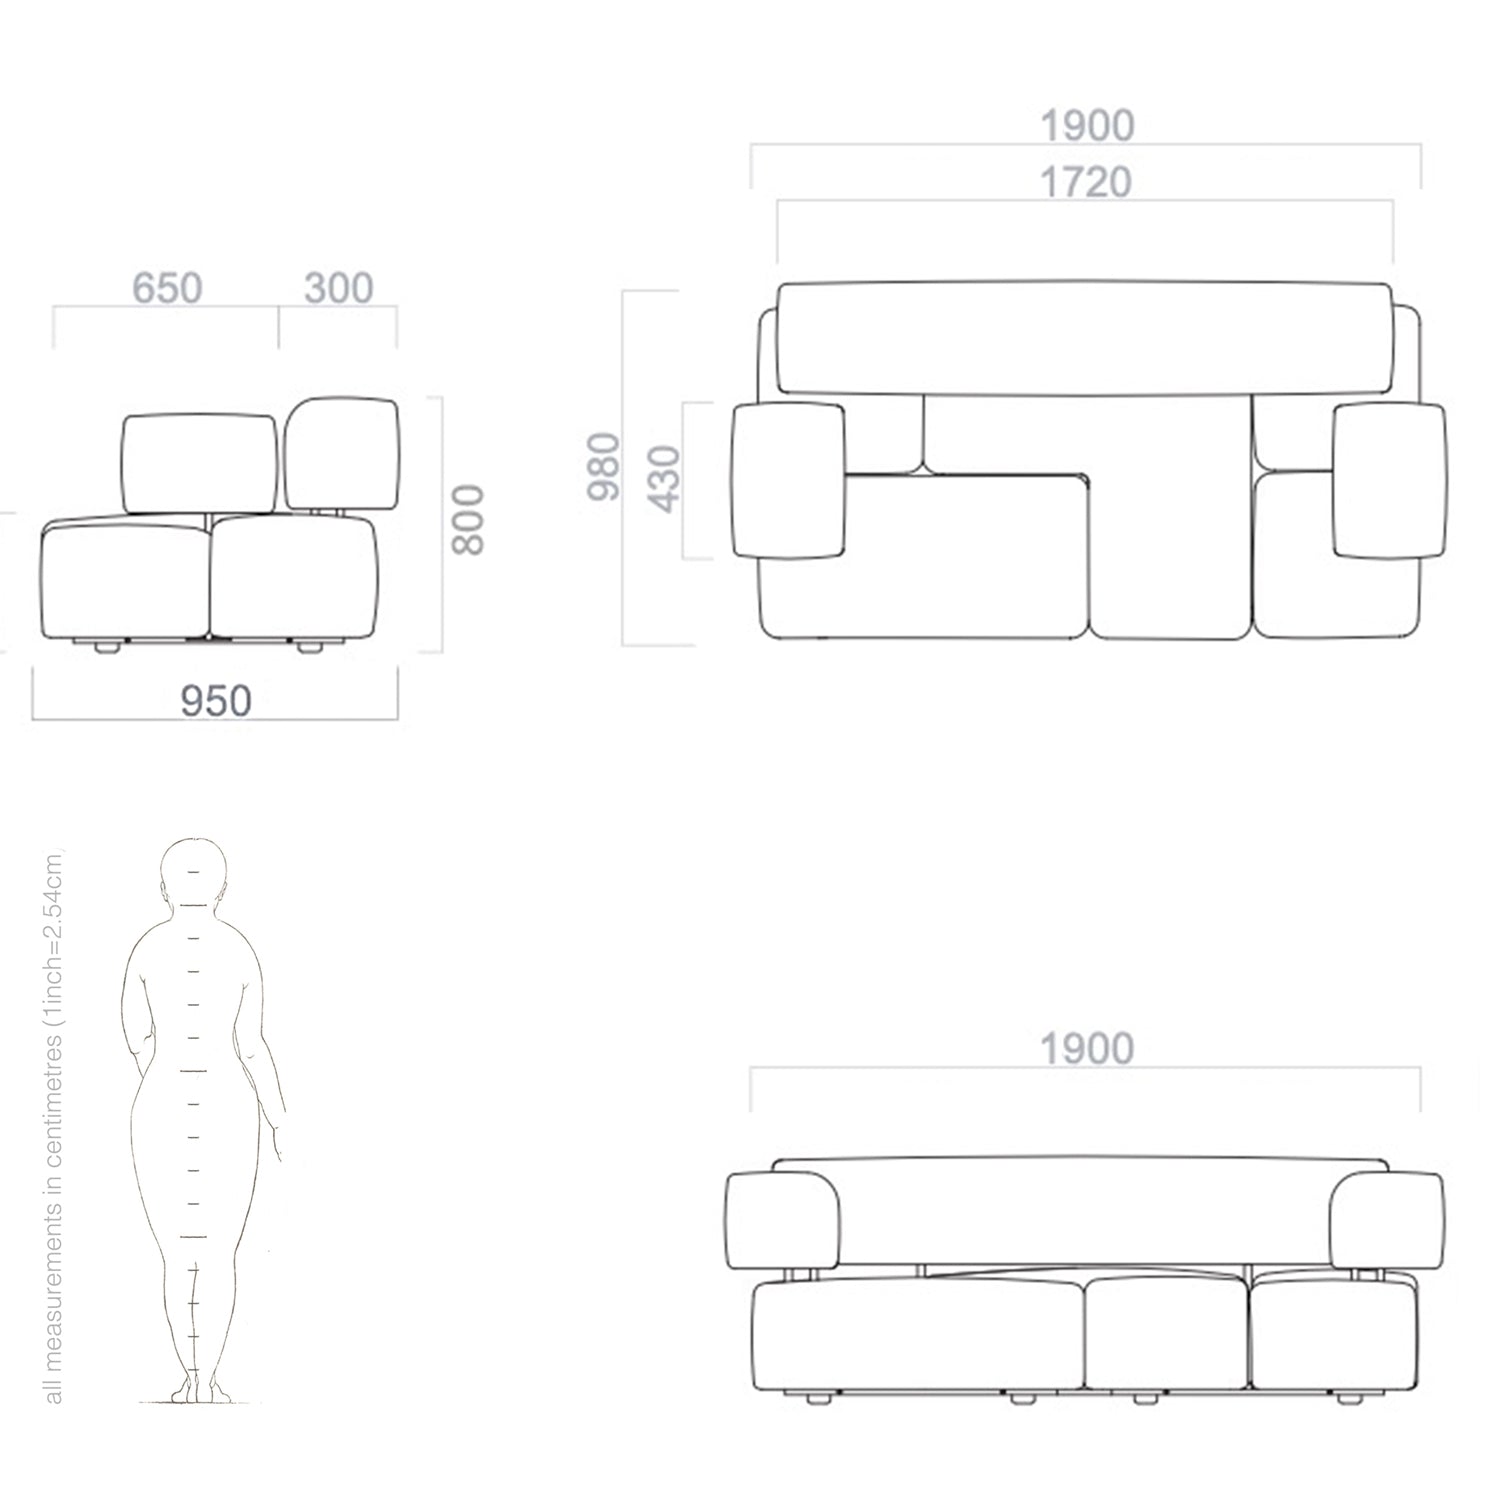 Transformable into linear sofa, L-shaped corner unit, or daybed.